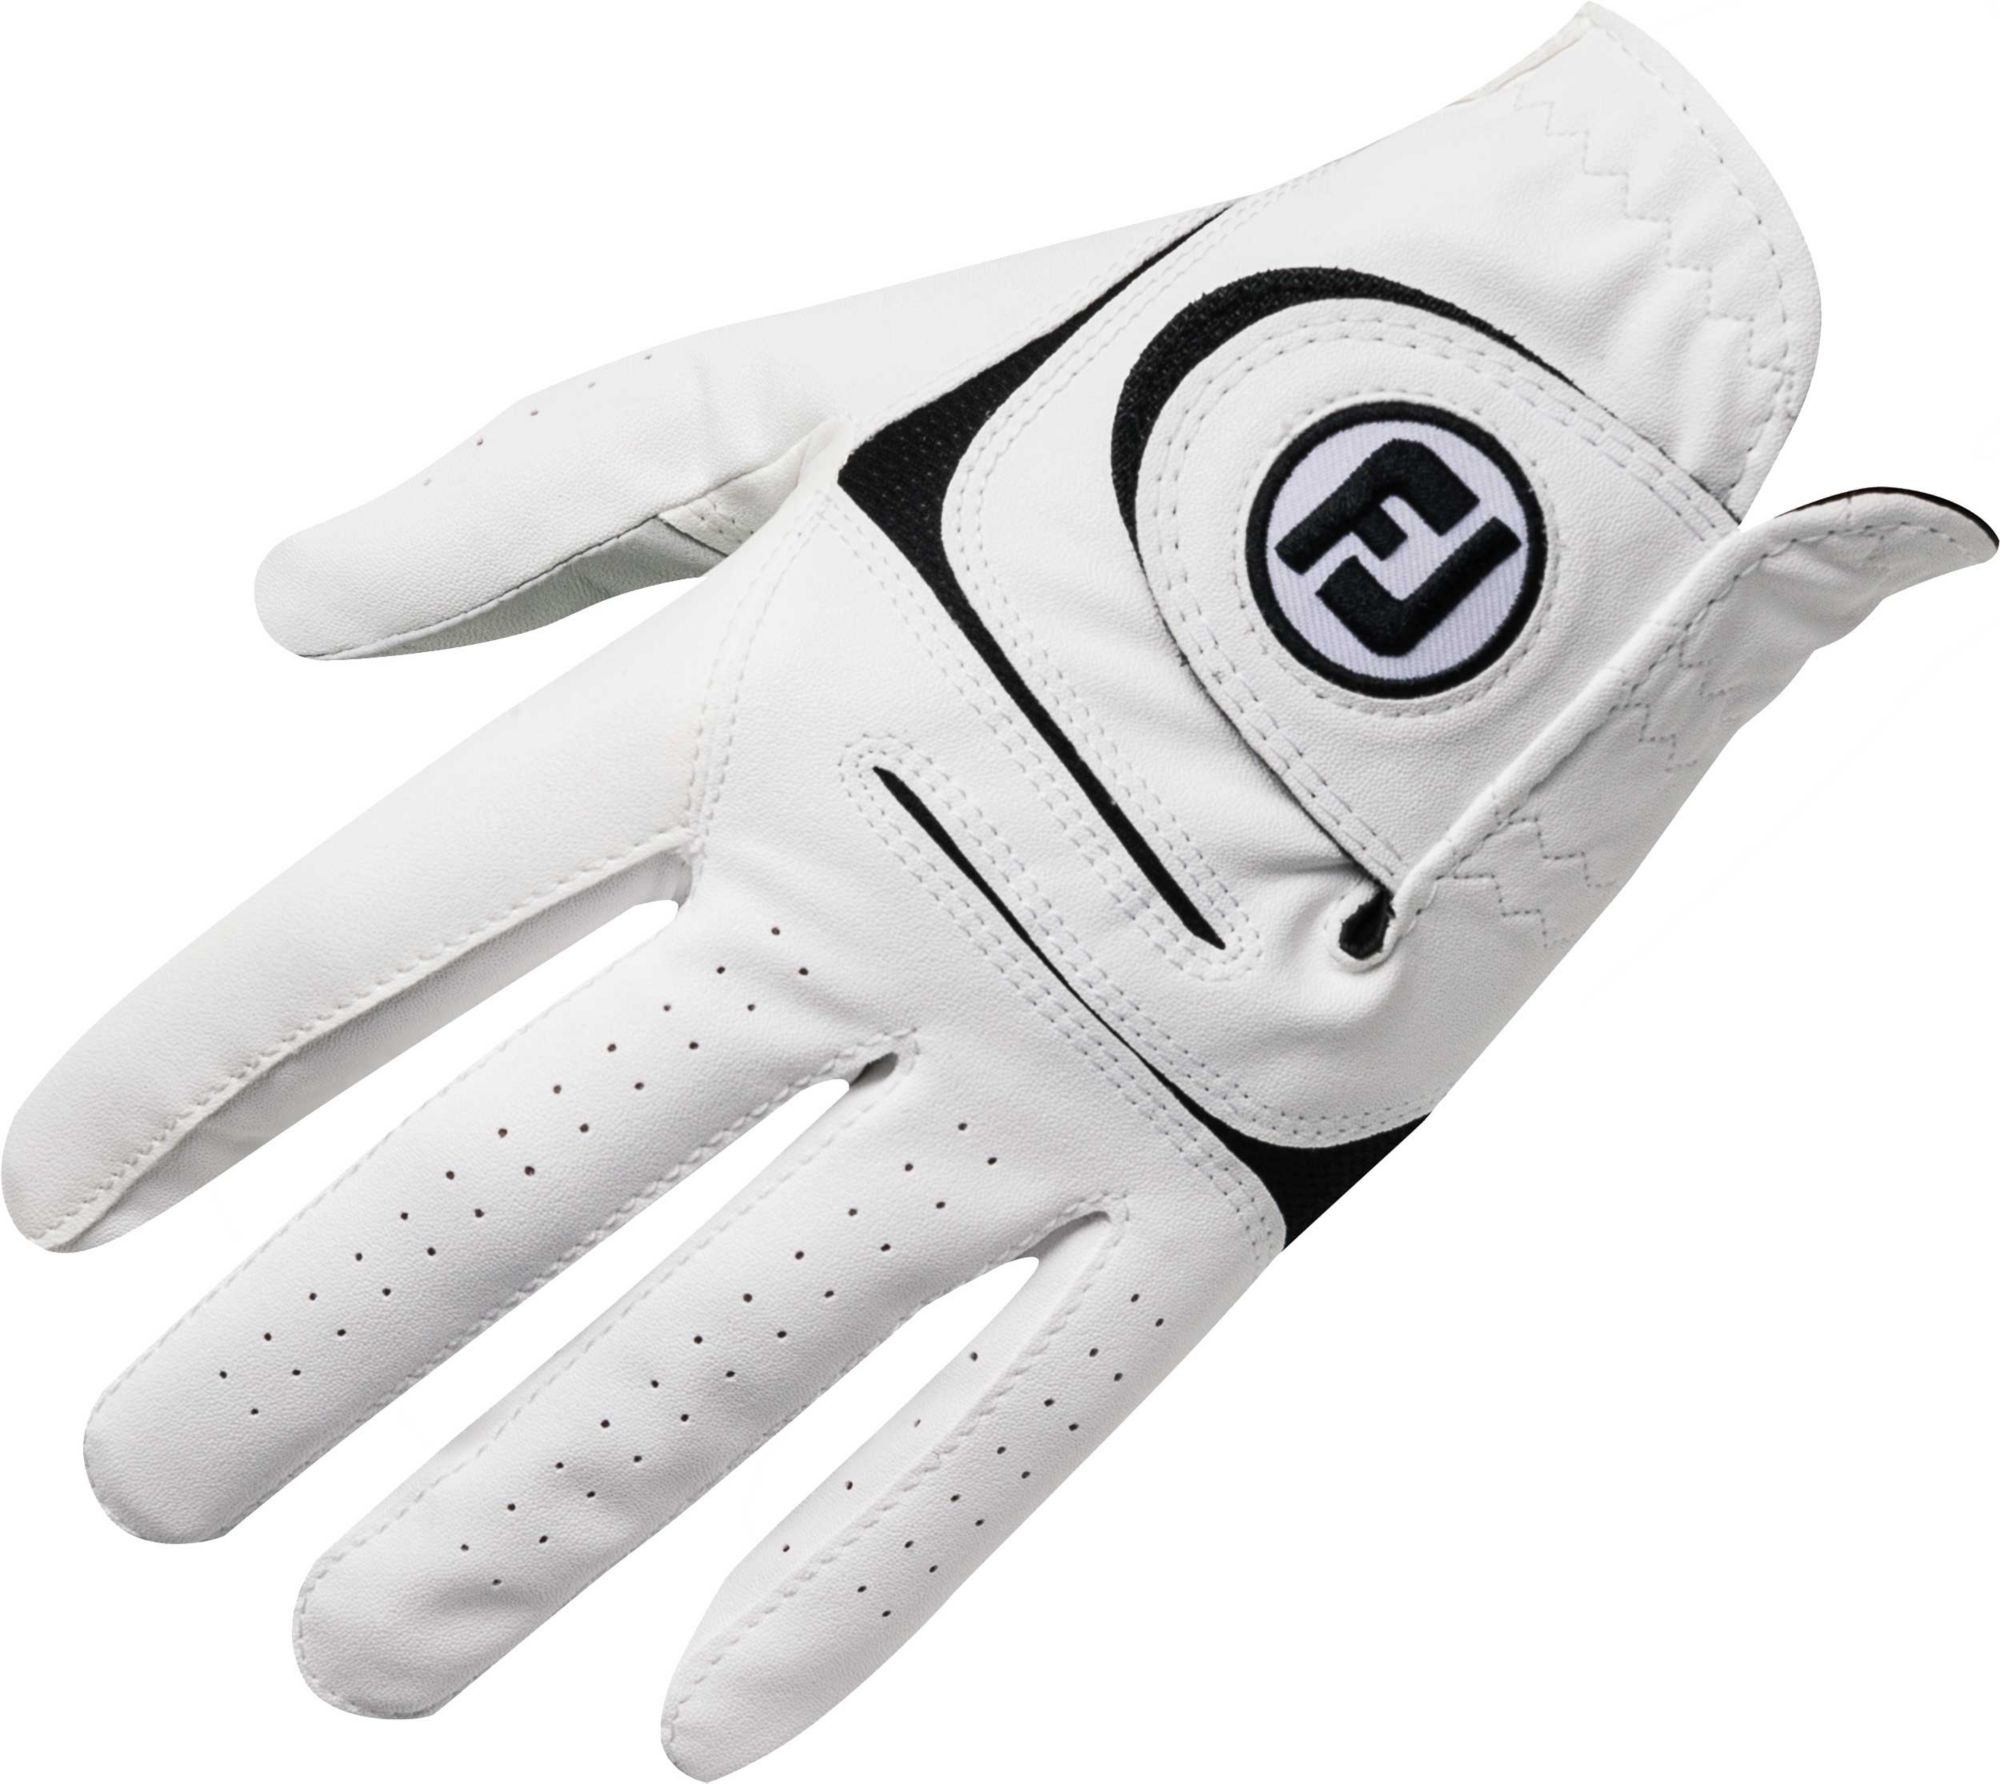 FootJoy Men's WeatherSof Golf Glove - 2 Pack, XL, Left Handed, White - image 2 of 3